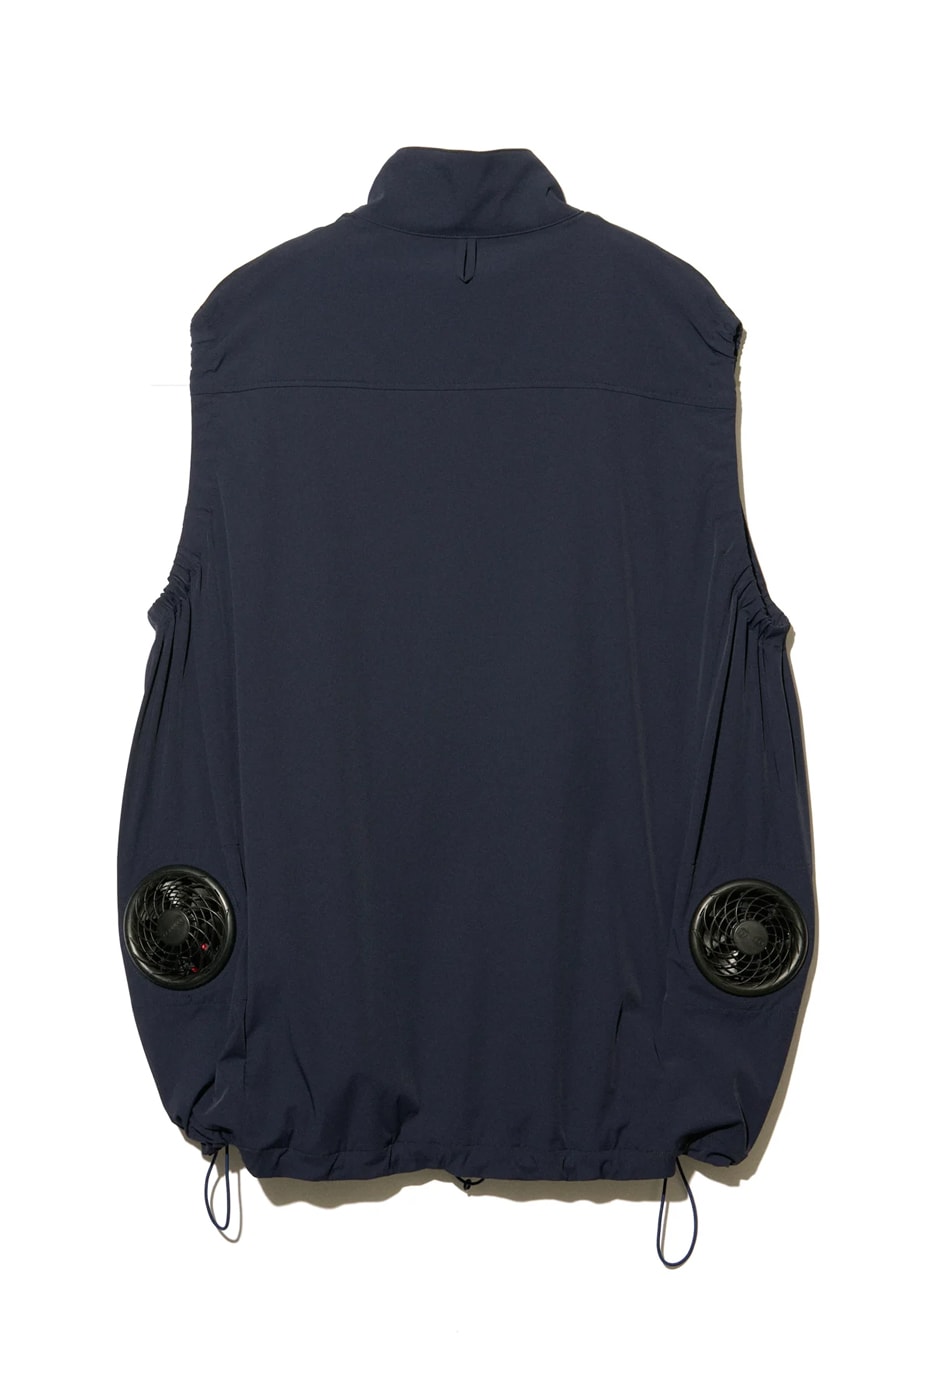 FreshService Is Back With Another Air Cooler Vest Just in Time for Upcoming Summer Season